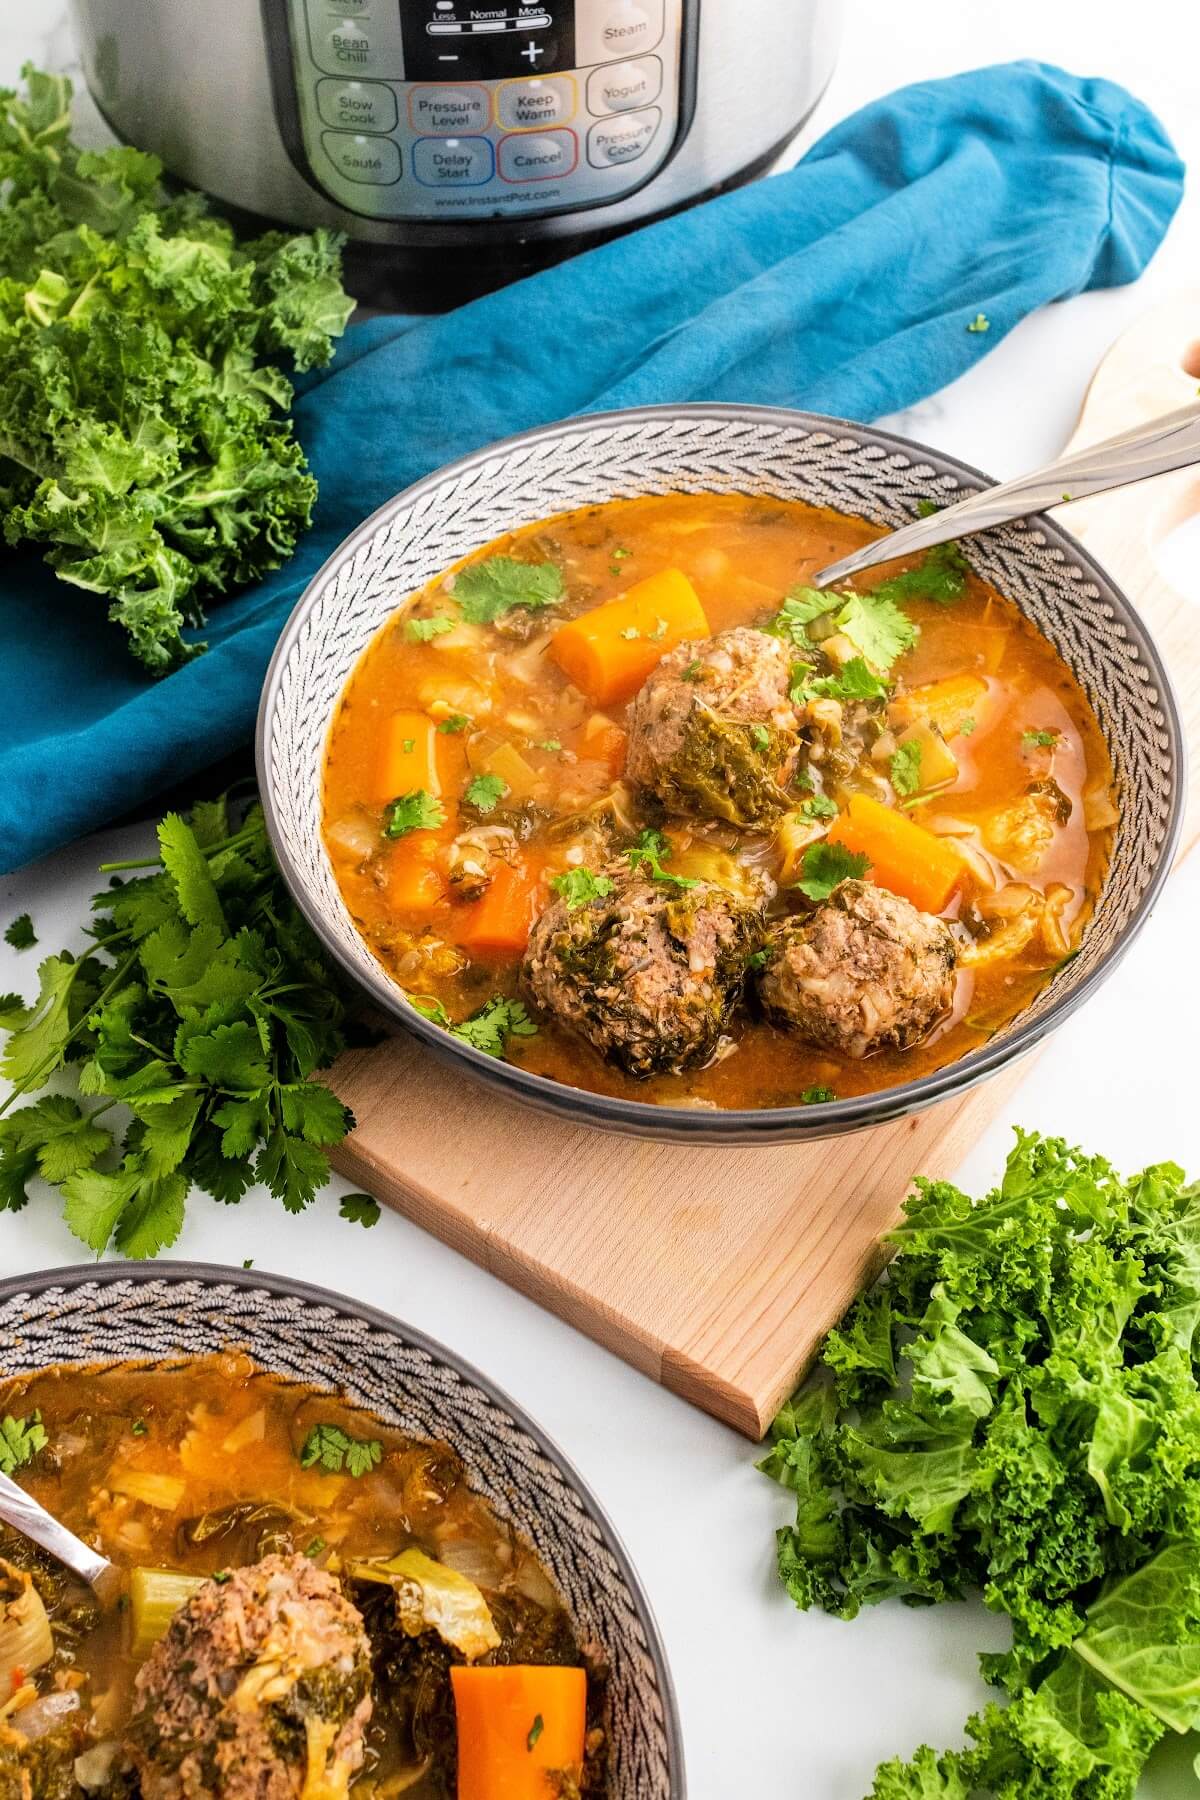 2 bowls of meatball soup with chunks of carrots, vegetables and fresh herbs, sitting next to fresh cilantro, fresh kale and a blue cloth napkin and the Instant Pot in the background.